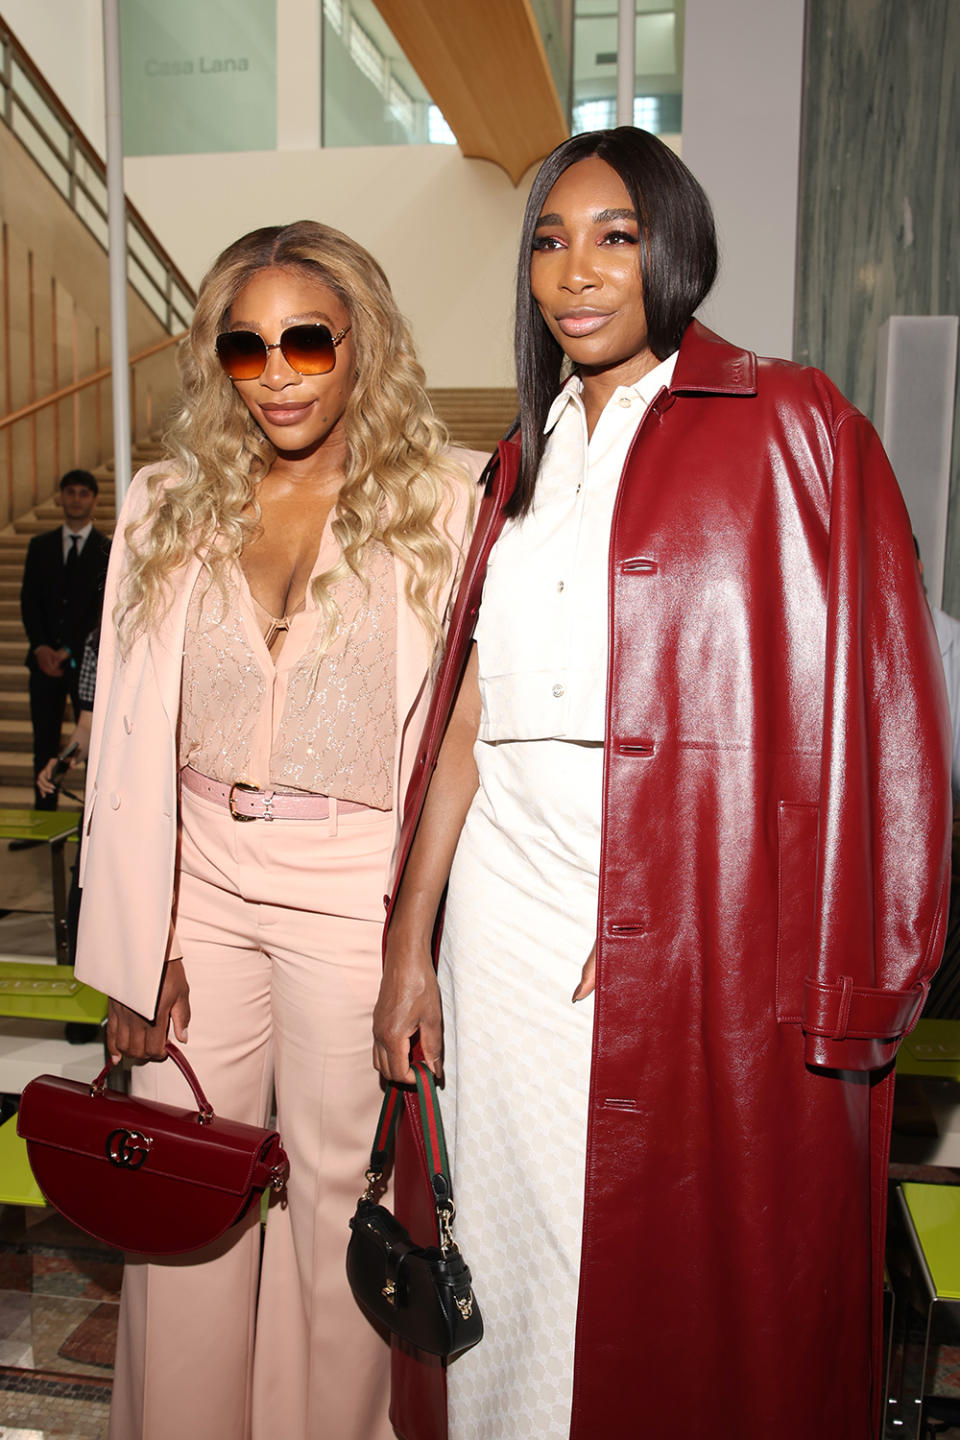 Venus Williams and Serena Williams attend the Gucci spring 2025 menswear fashion show on June 17 in Milan, front row, Ancora red, monogram